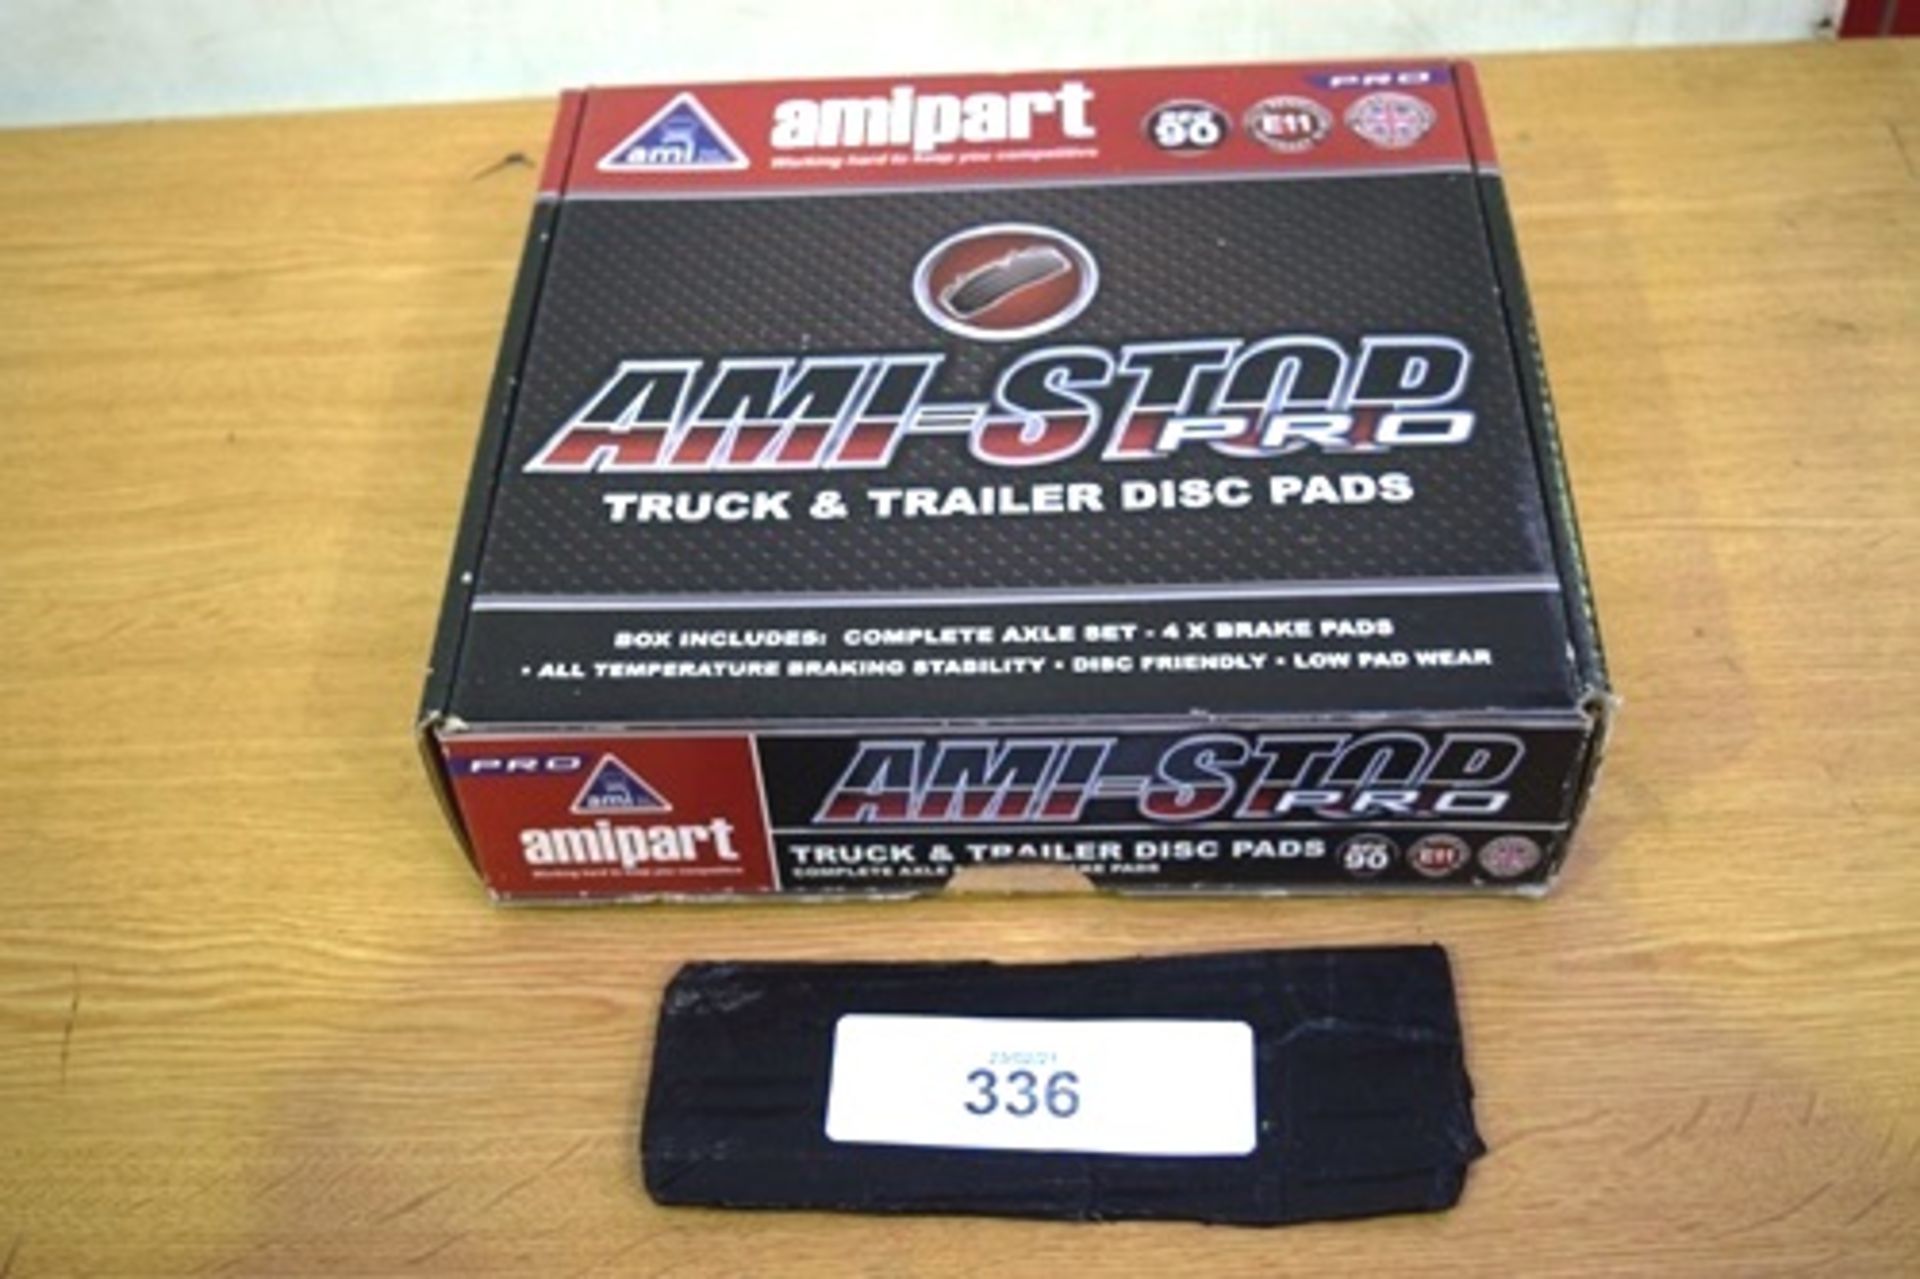 1 x pack of Amipart Pro truck & trailer disc pads, model AM8000, box contains 4 x brake pads Pro